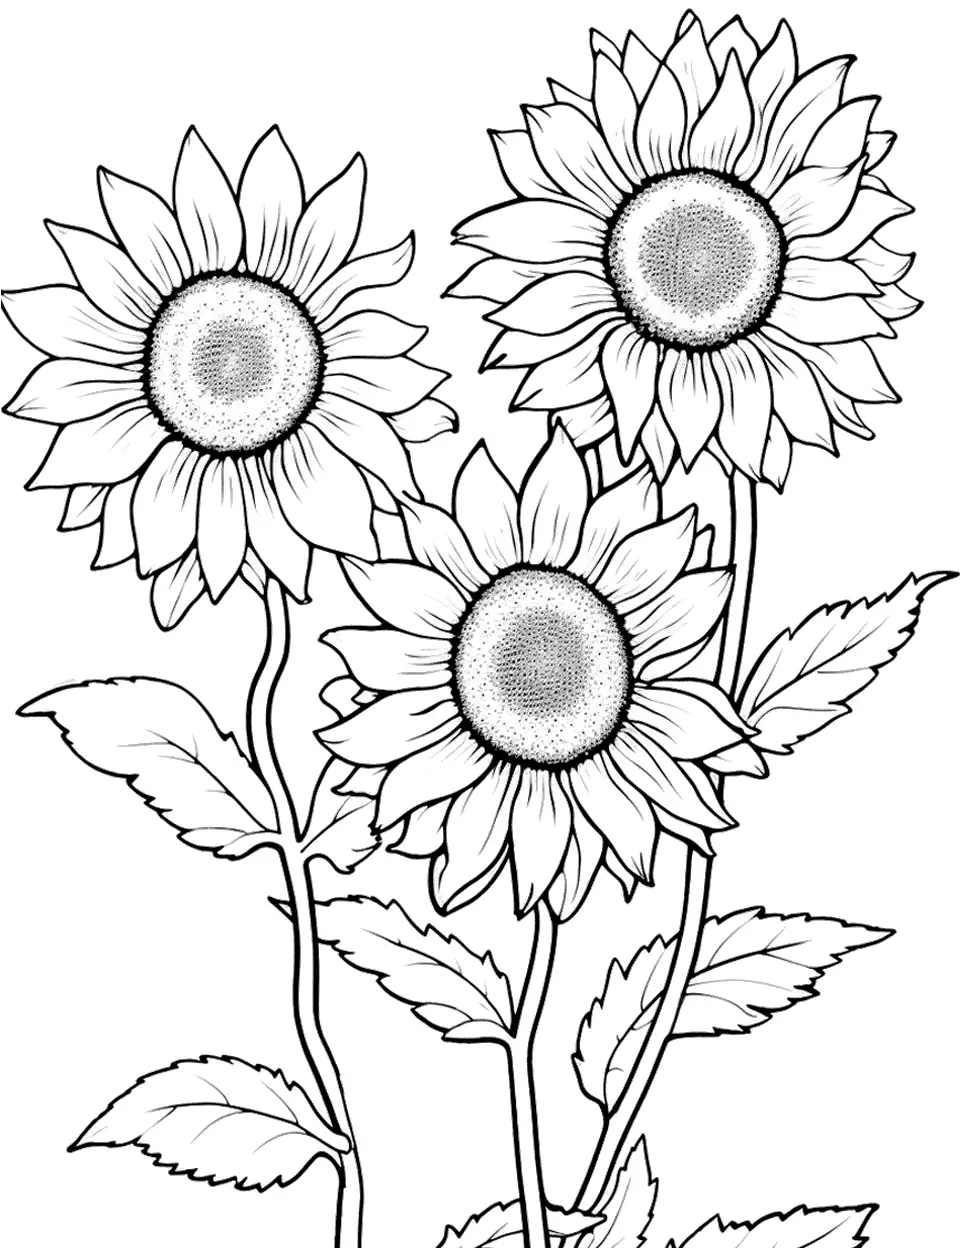 Dancing Sunflowers Sunflower Coloring Page - A few sunflowers dancing in the breeze.